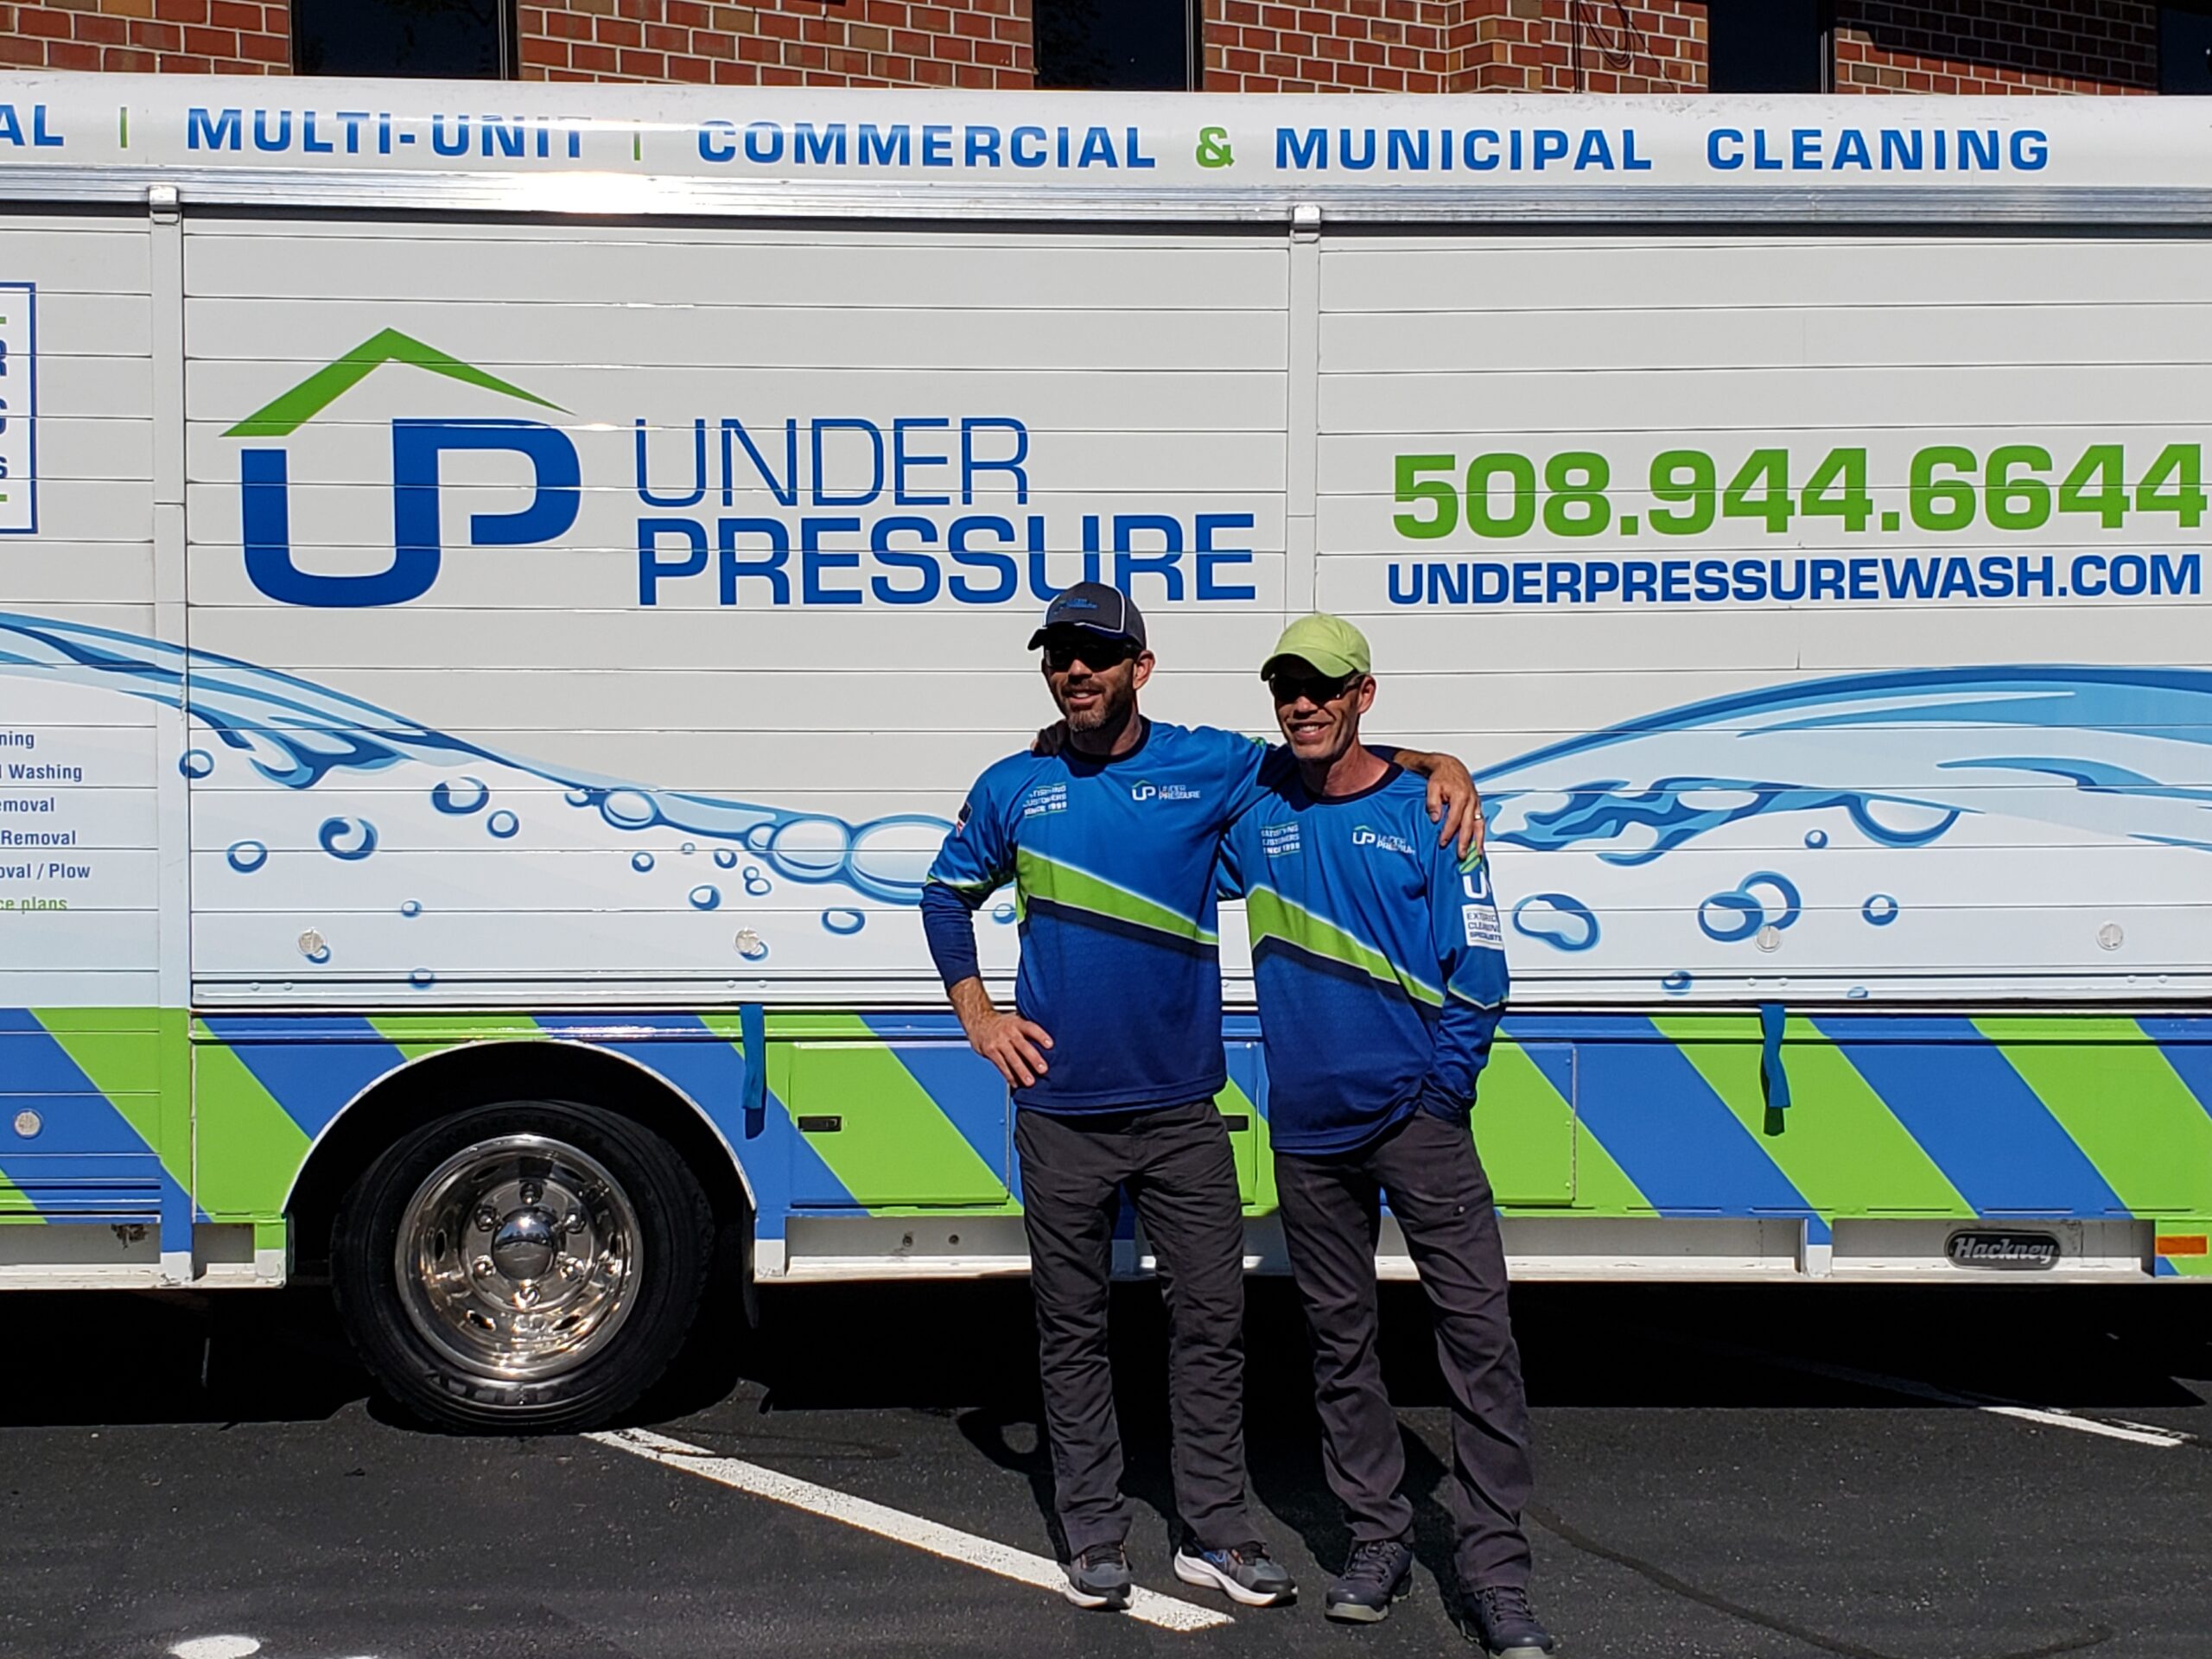 Business Profile: Under Pressure soft wash makes properties look new